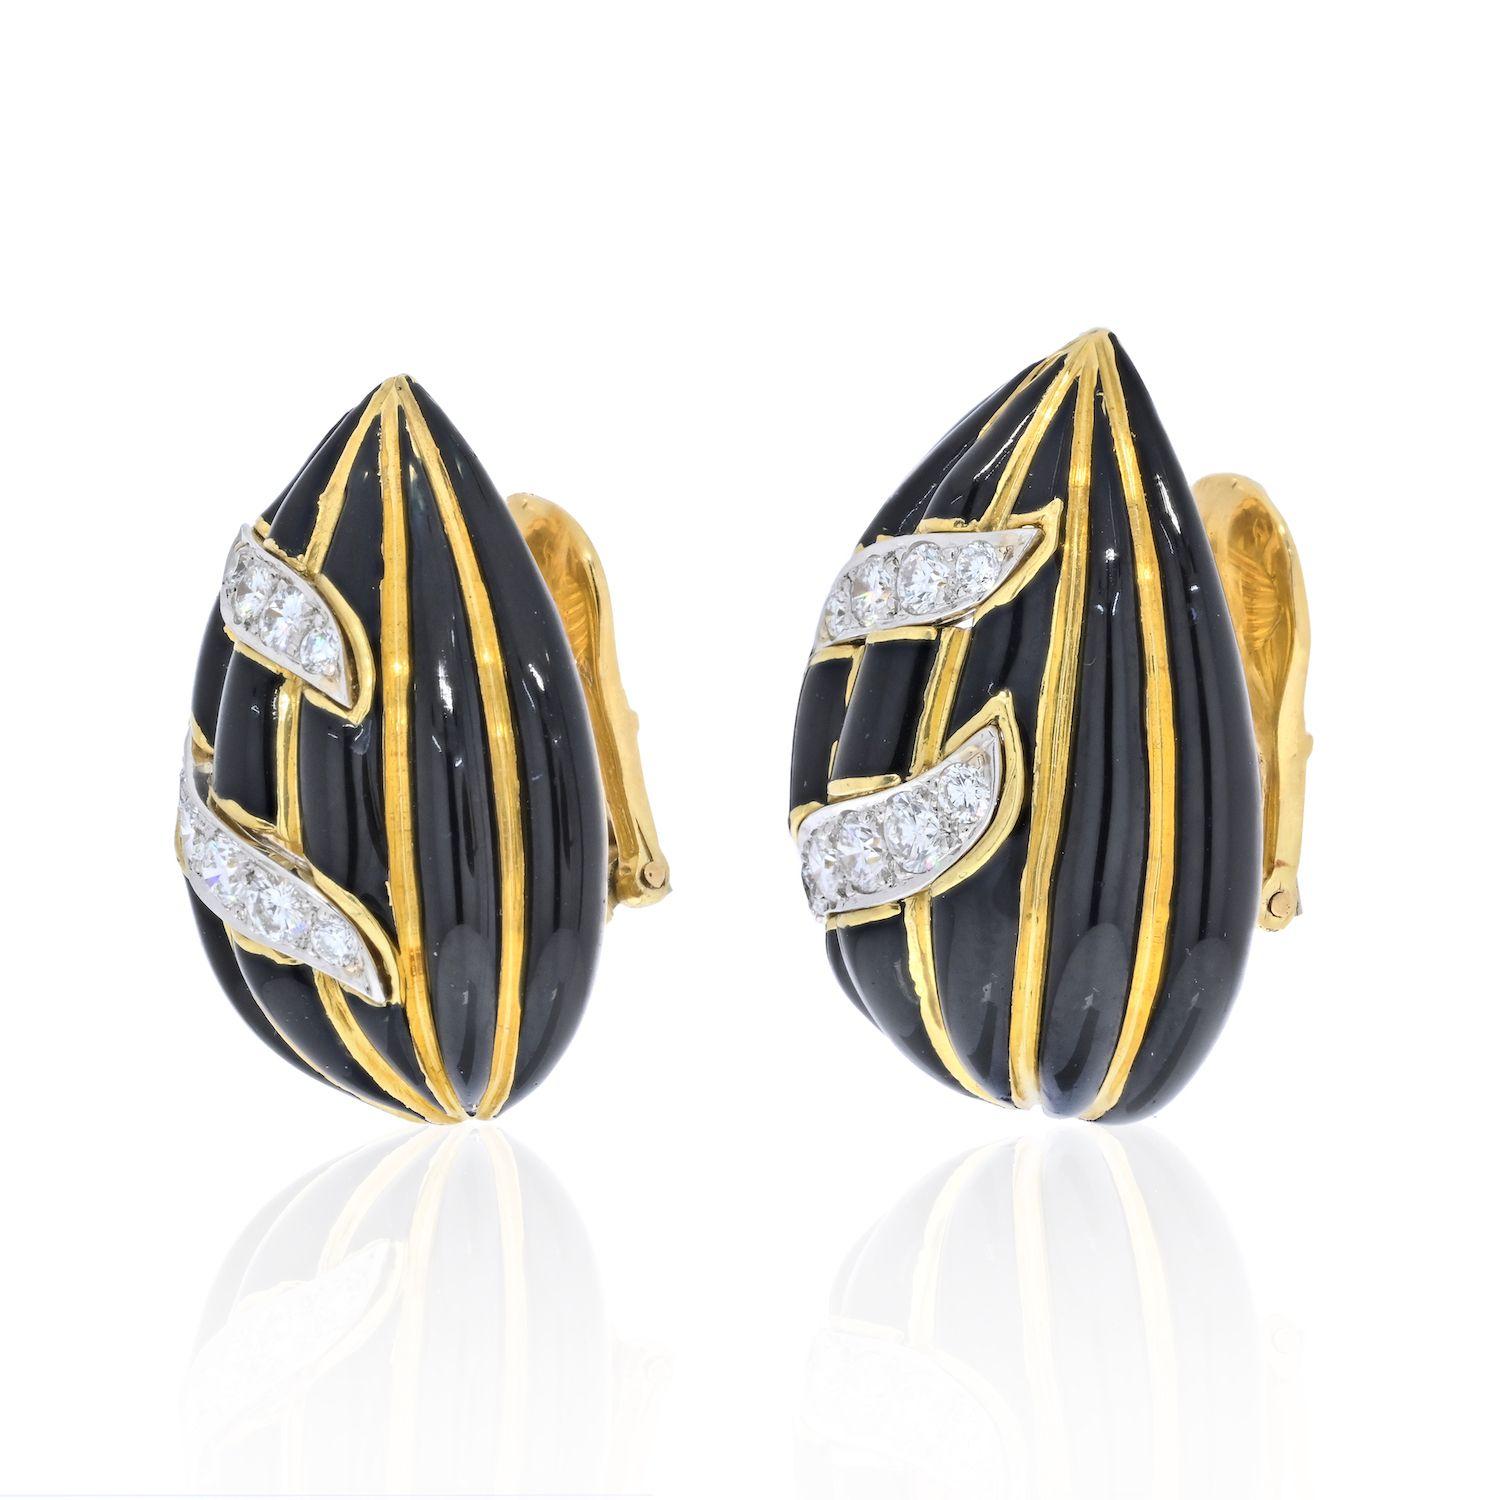 David Webb dome pear shaped clip earrings with signature Zebra stripes and diamonds. David Webb 18kt chic glossy earrings with black enamel and round cut diamonds on platinum plaques. The earrings measure approx. 30 x 22mm. and offer an omega